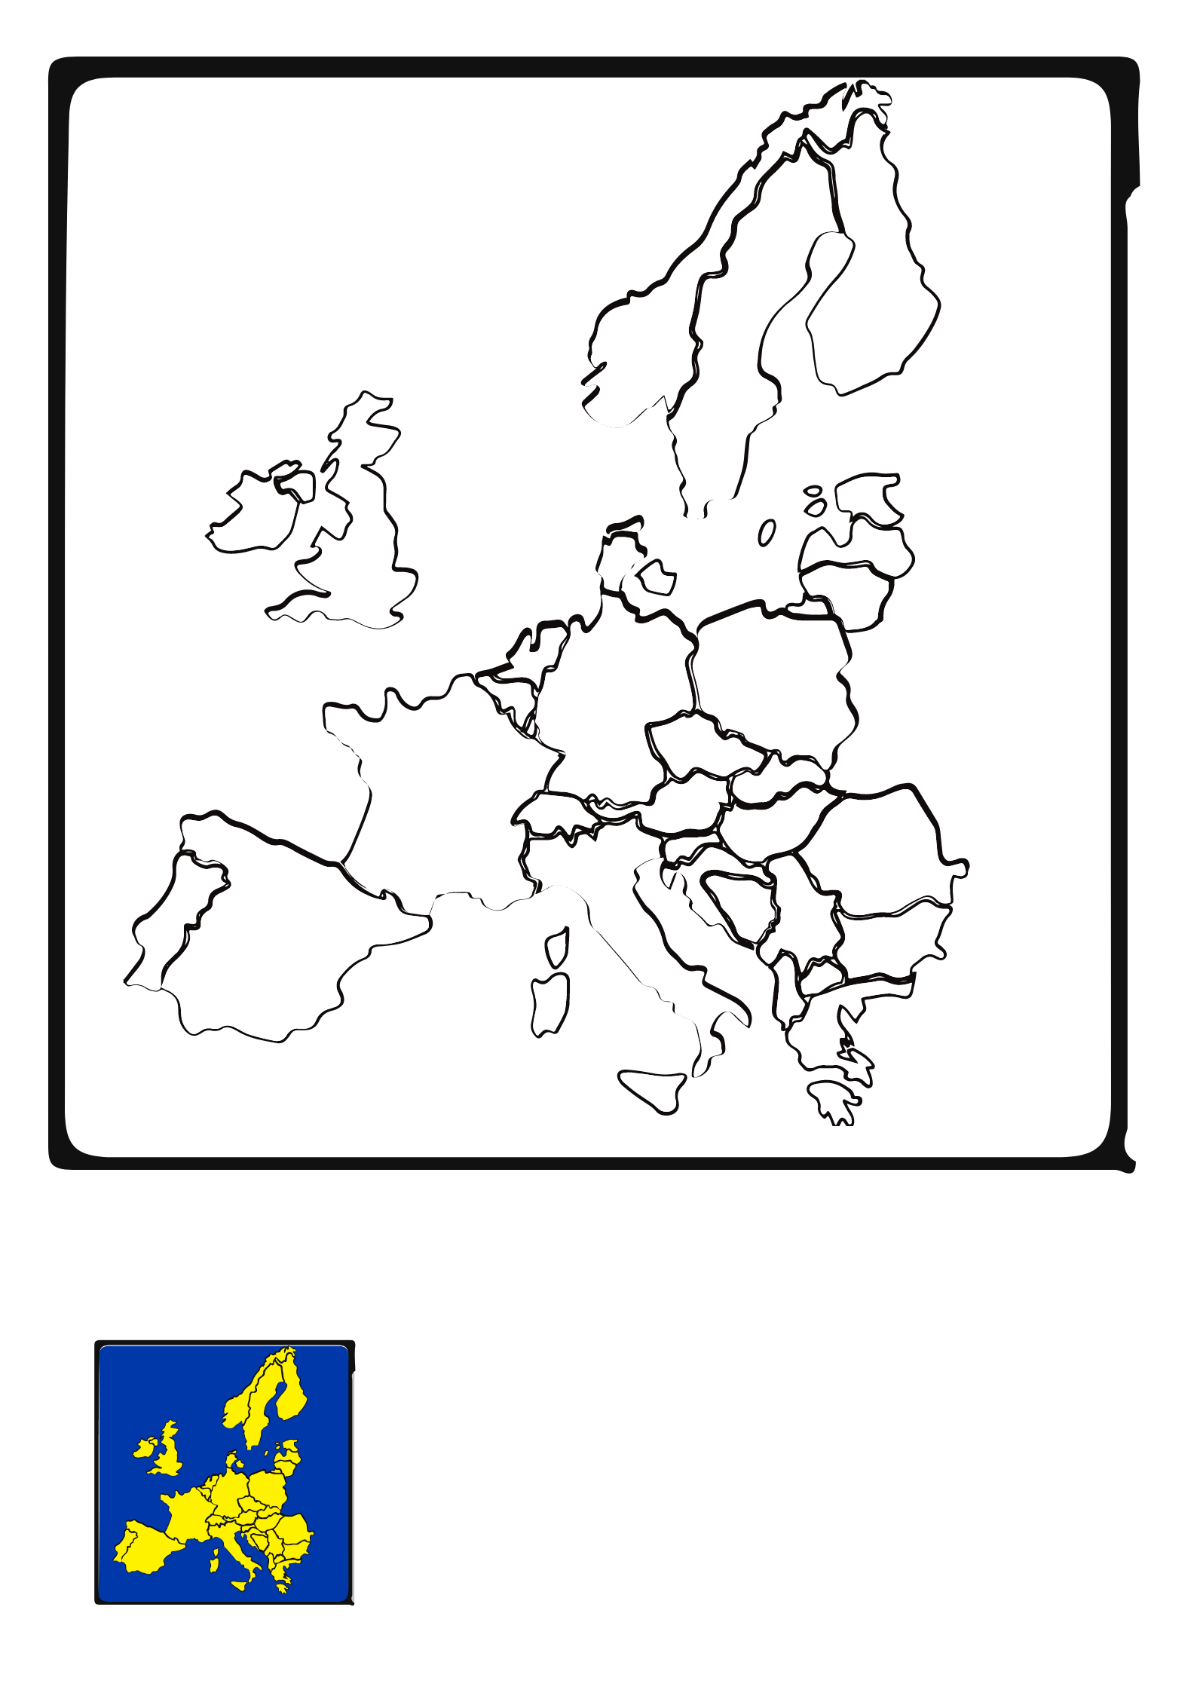 Europe Border Map Coloring Page Template